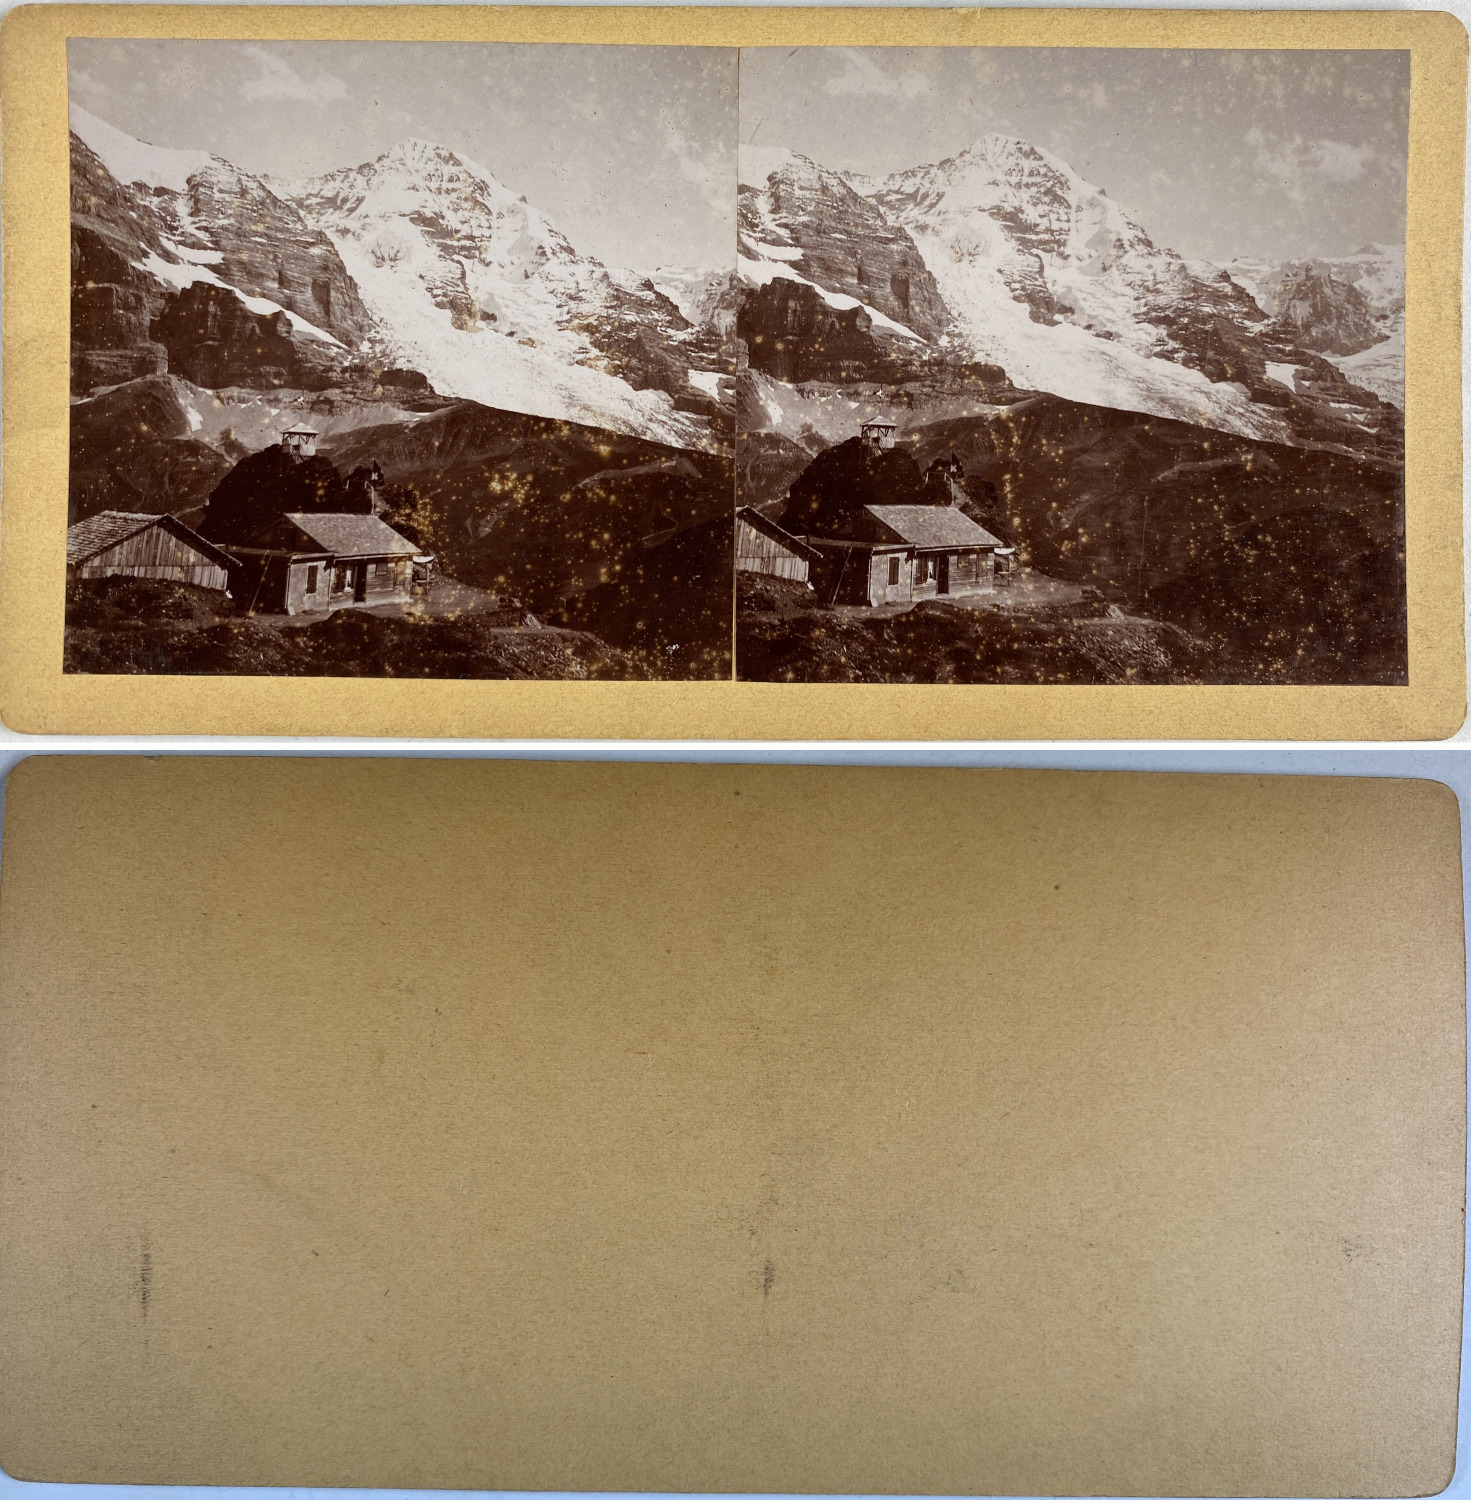 Chalet in the Alps, Vintage Citrate Print, circa 1900, Stereo Print Vintage, le